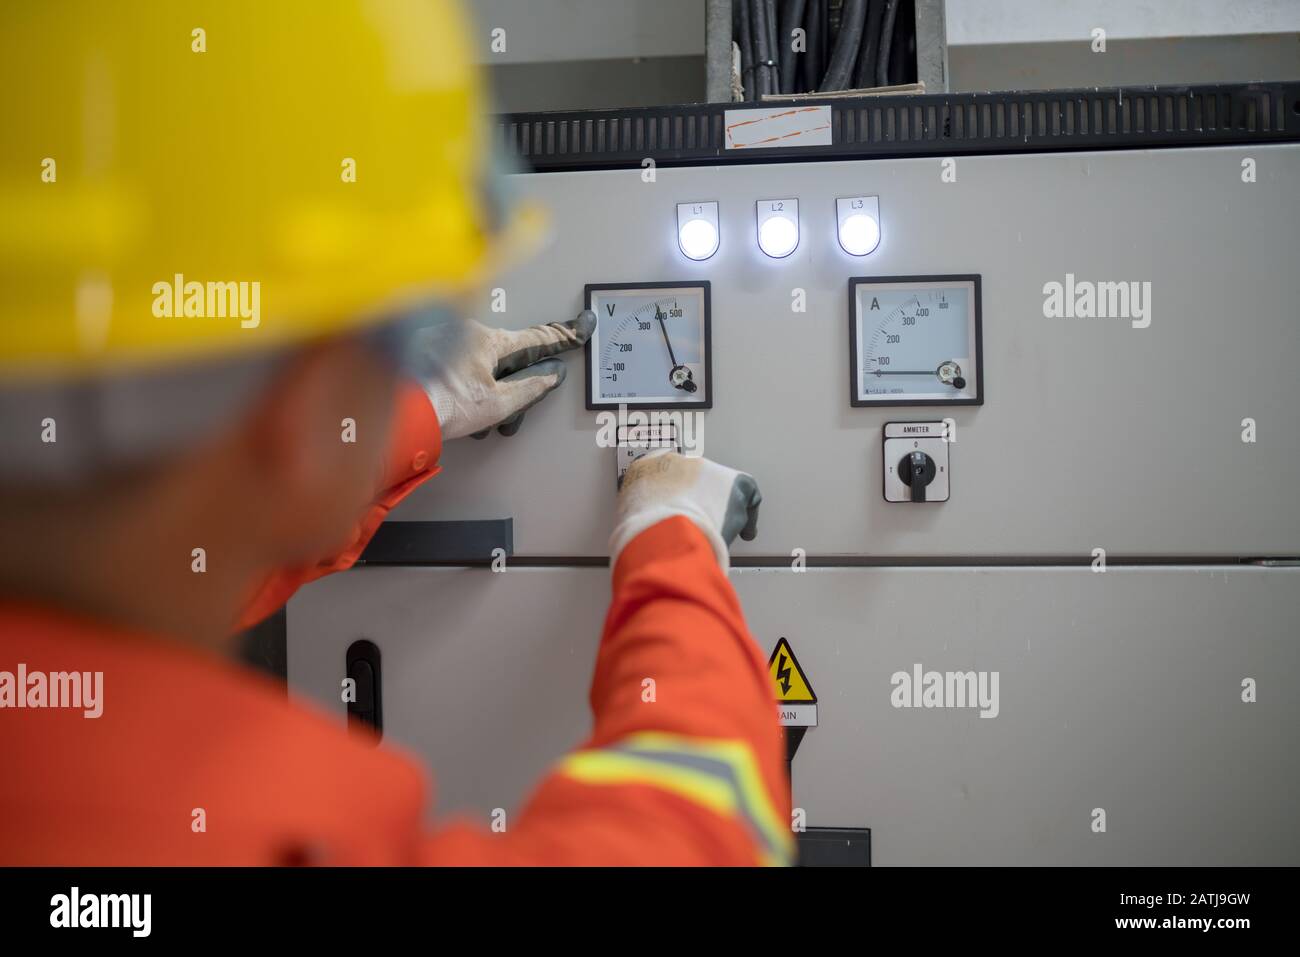 Electrical engineers inspect the power meter system in the building. Stock Photo